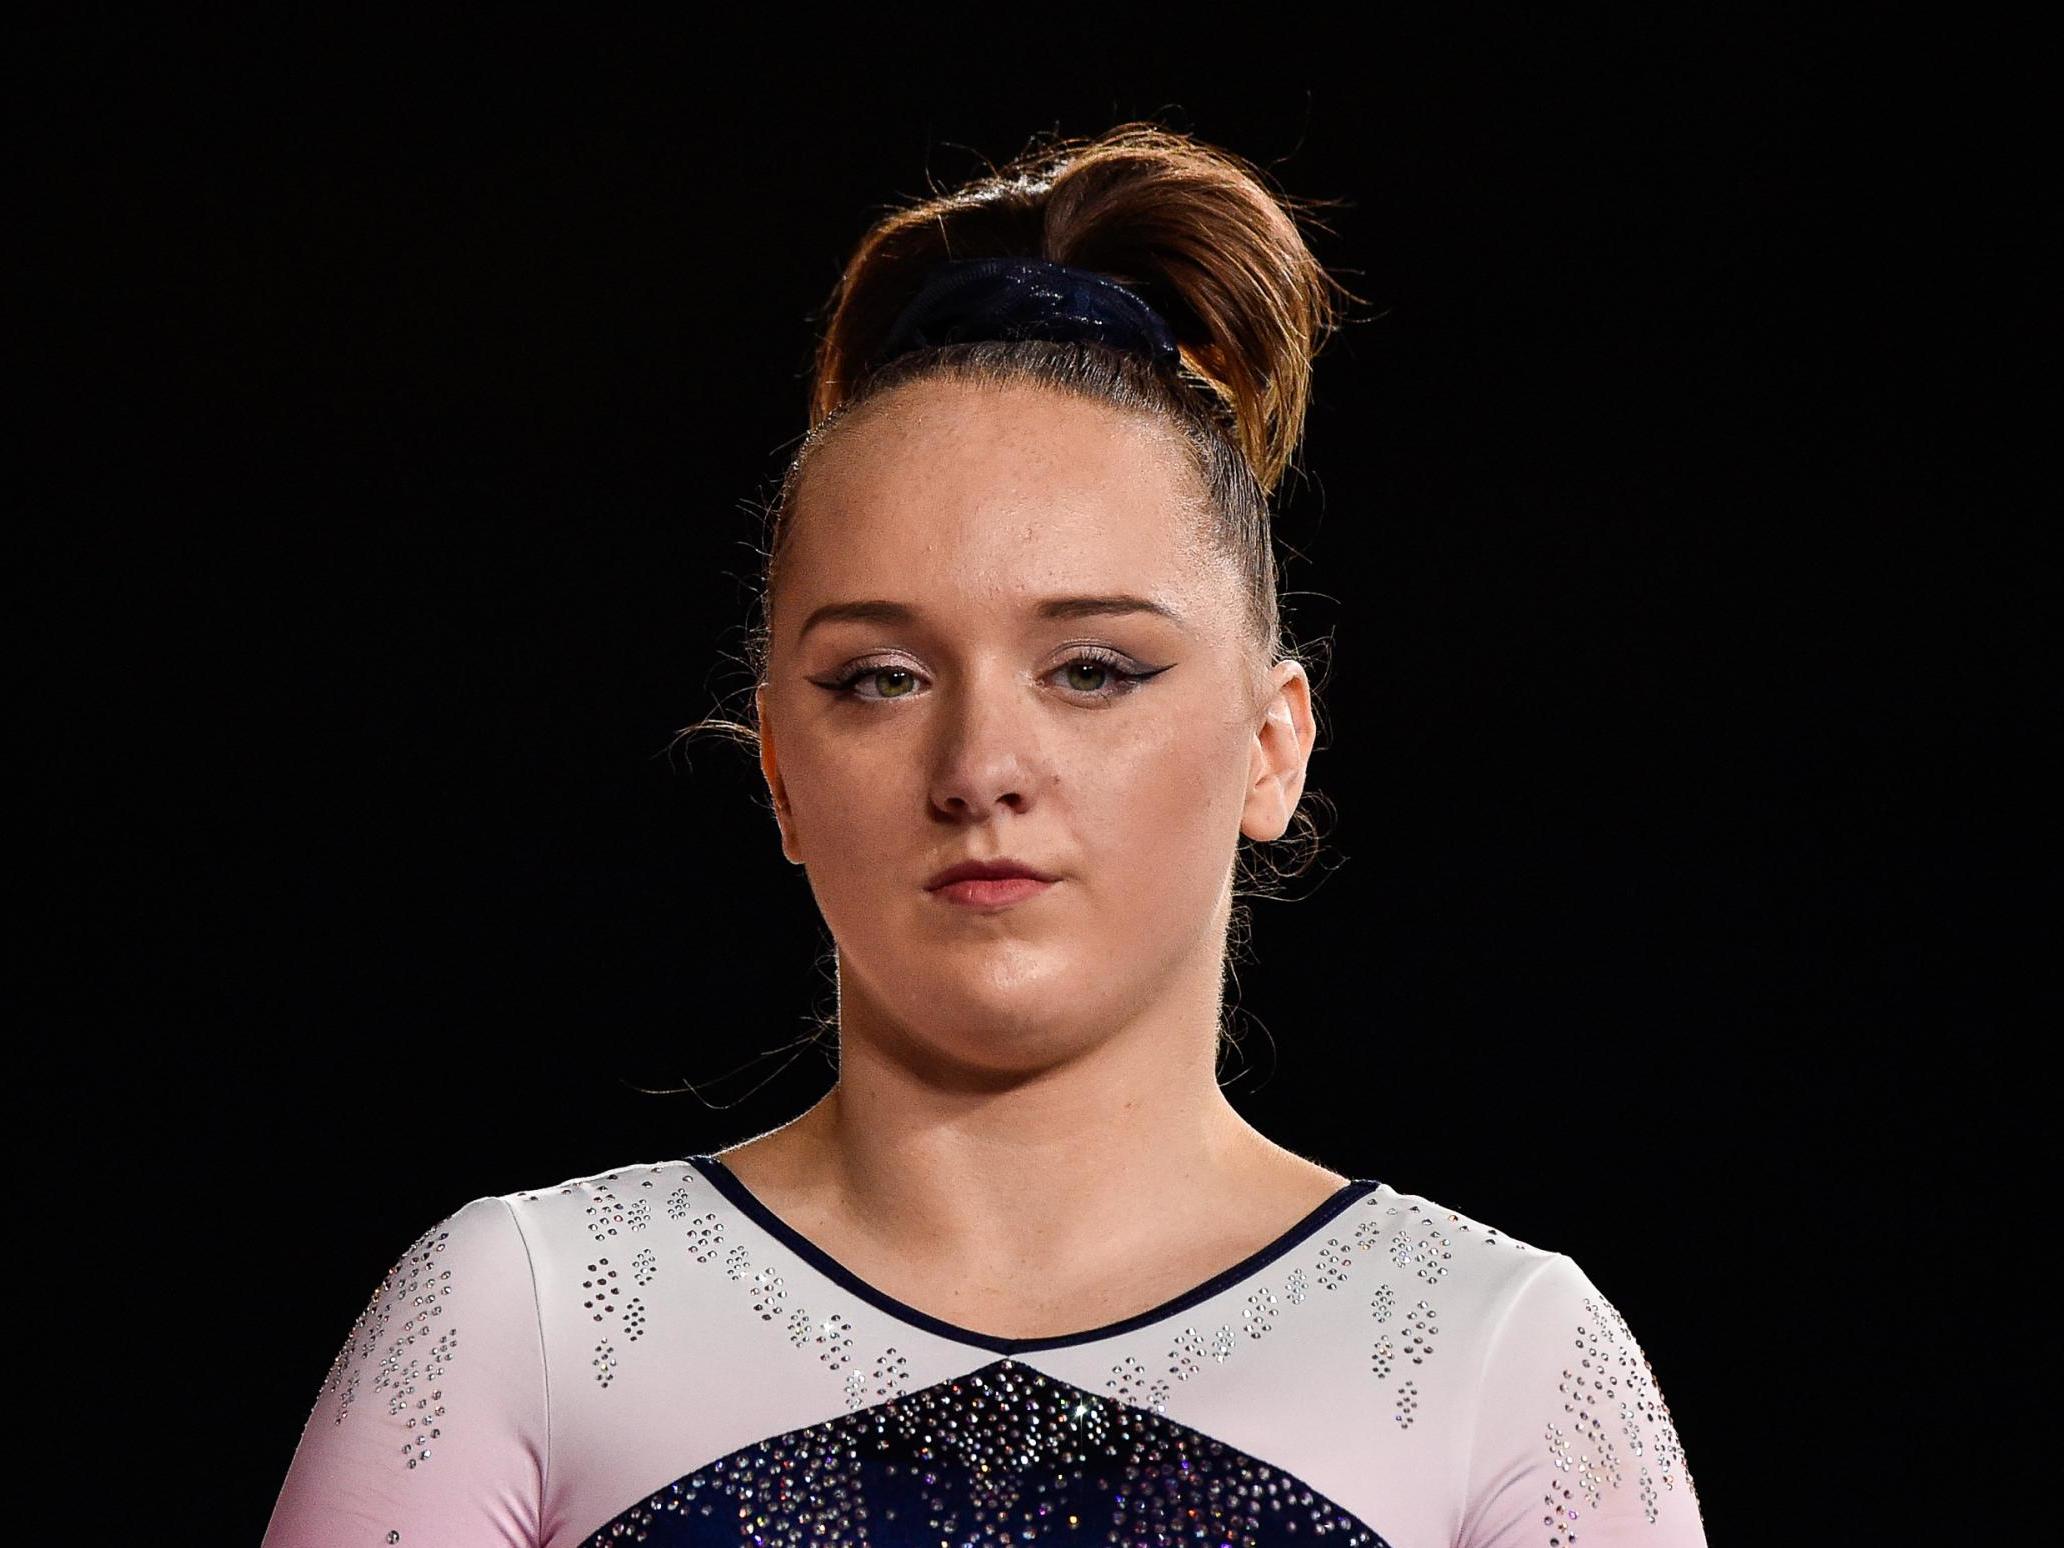 Twenty-year-old Amy Tinkler, who quit gymnastics this year, became Britain’s youngest medallist at the 2016 Olympics (Getty)